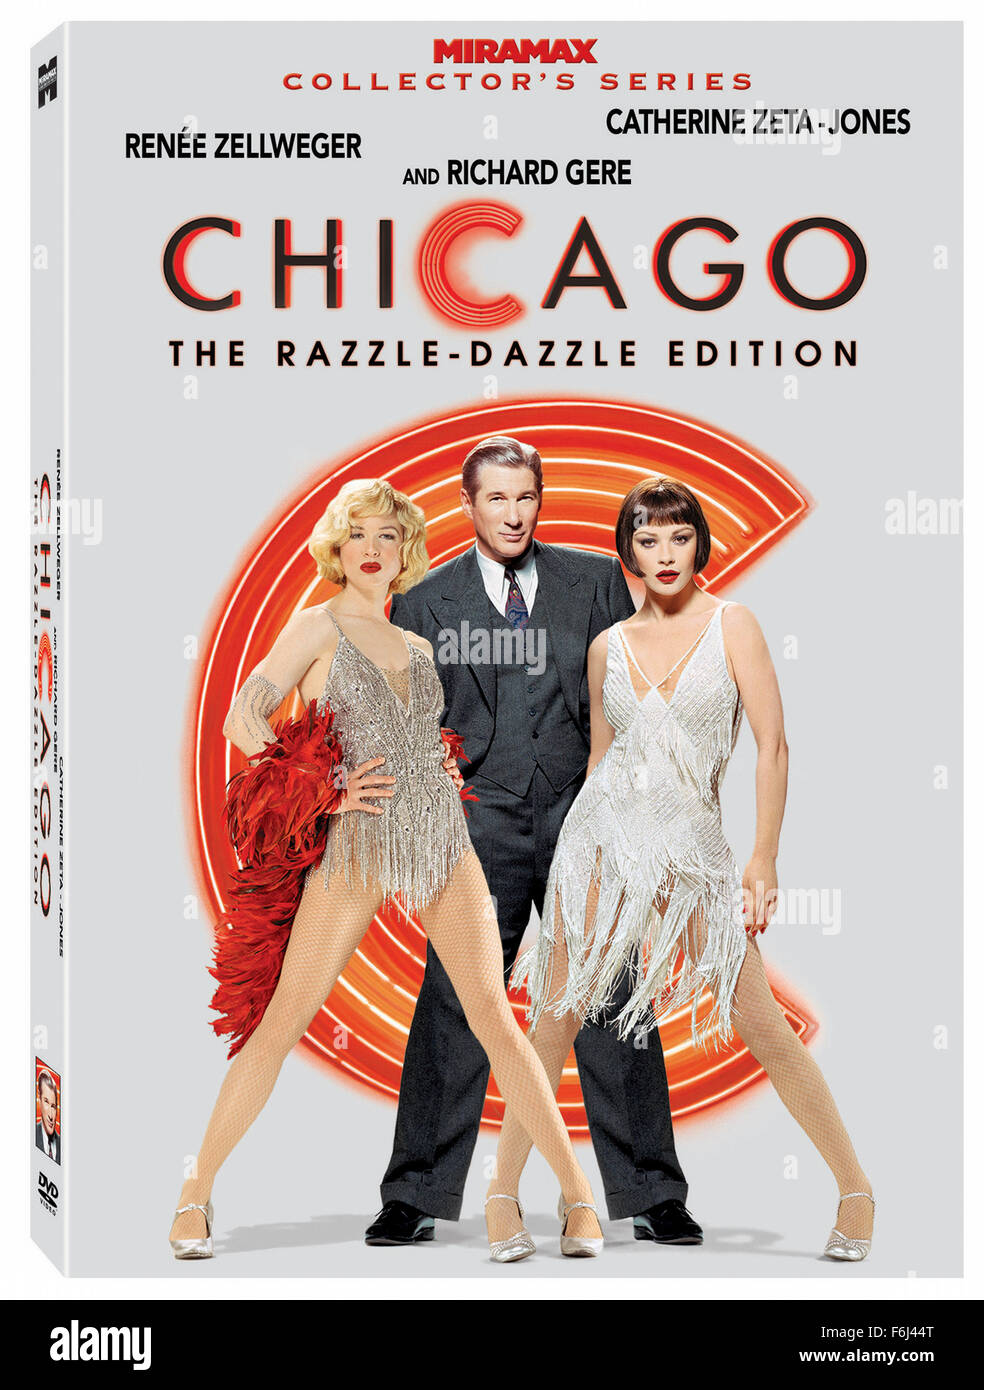 Dec 10, 2002; Chicago, IL, USA; Key DVD box art featurin (left to right)  RENEE ZELLWEGER as Roxie Hart, RICHARD GERE as Billy Flynn, and CATHERINE  ZETA-JONES as Velma Kelly in the